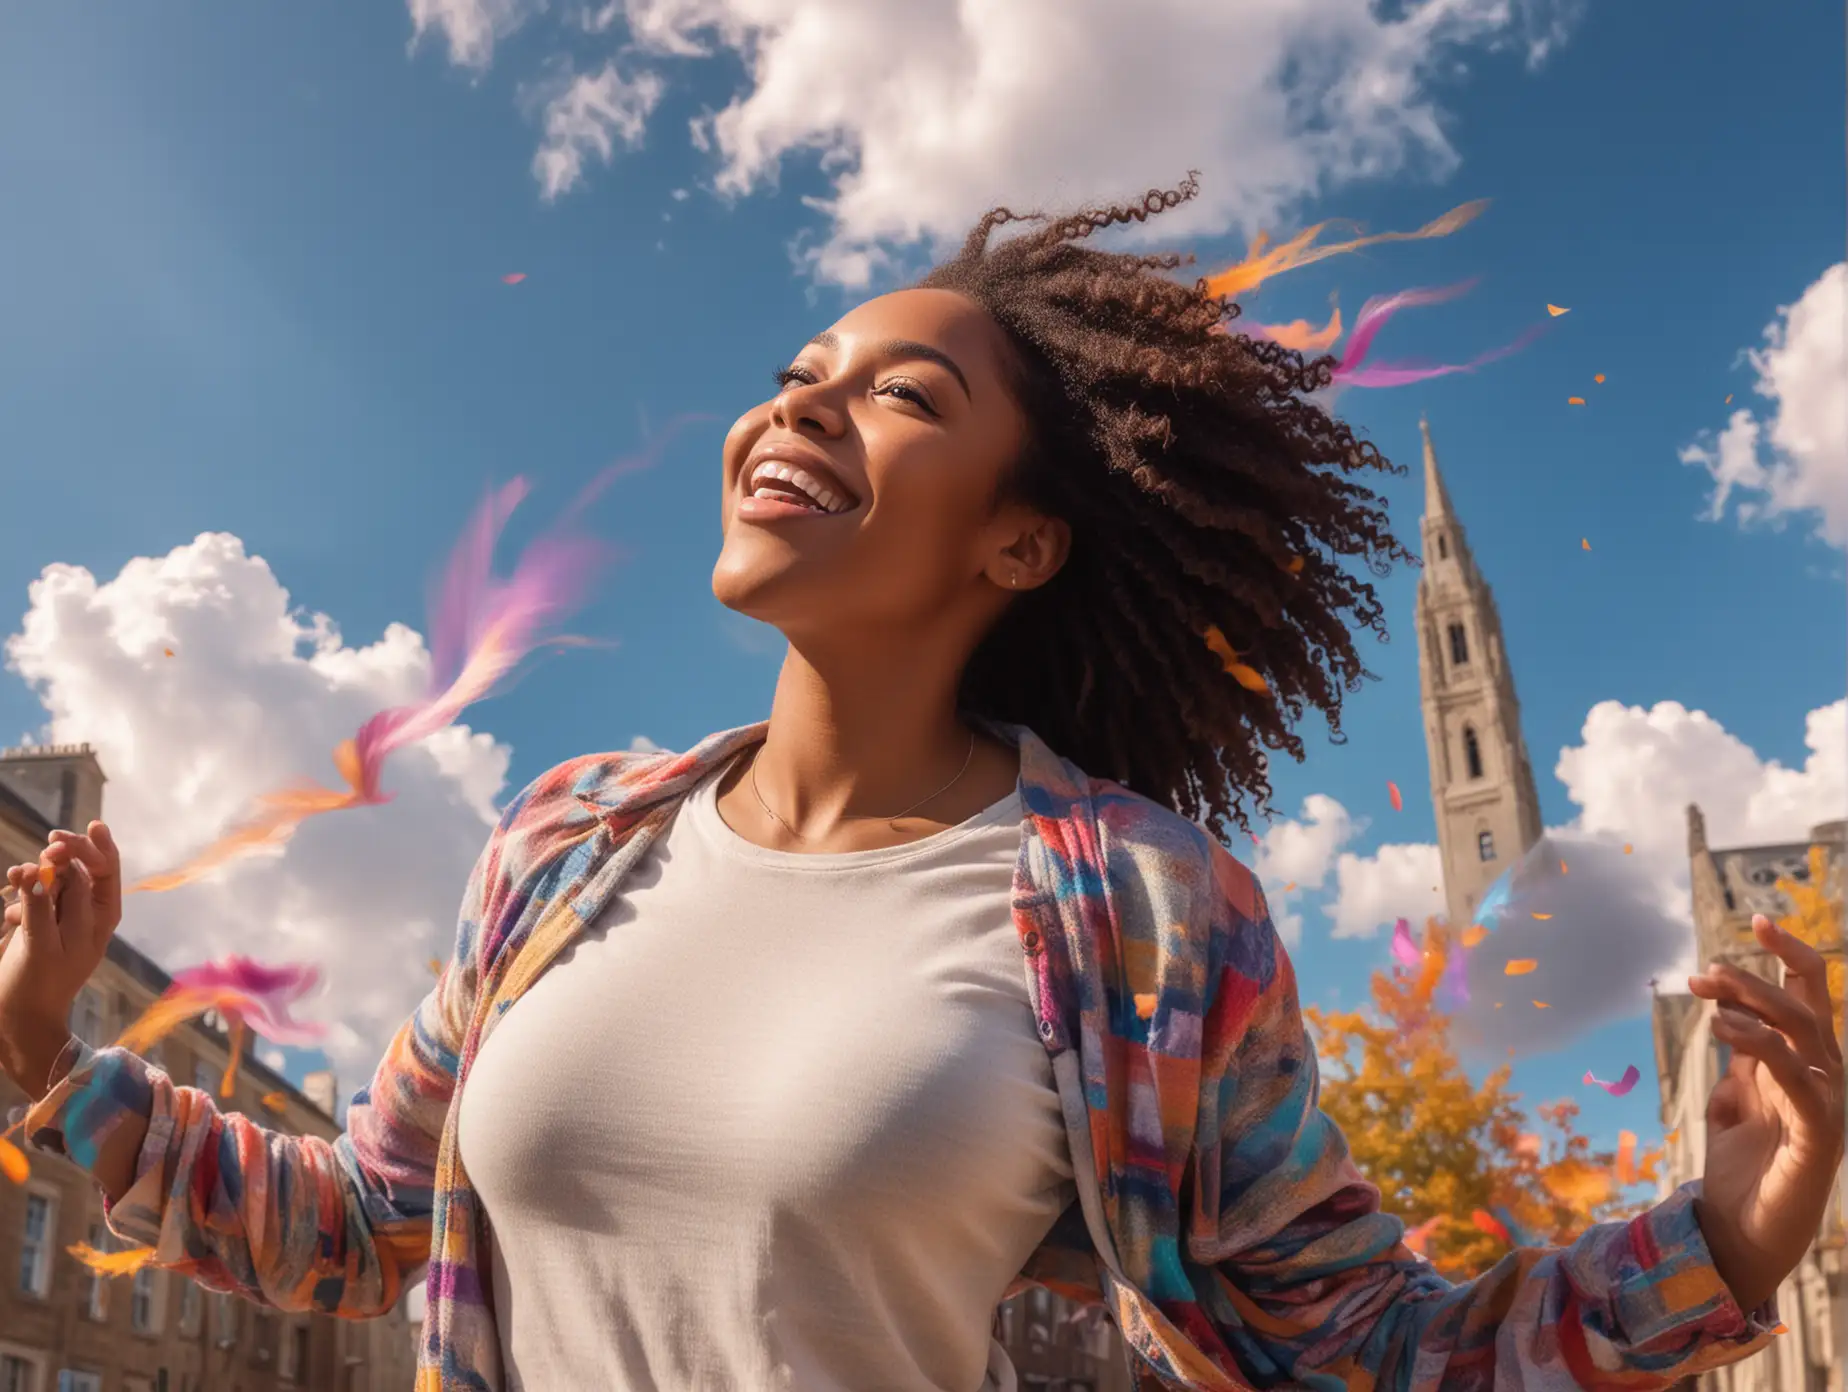  Beautiful black woman smiling as she reaches up to an open sky with the colorful university reveals bright. Magical colorful winds on energy surround her